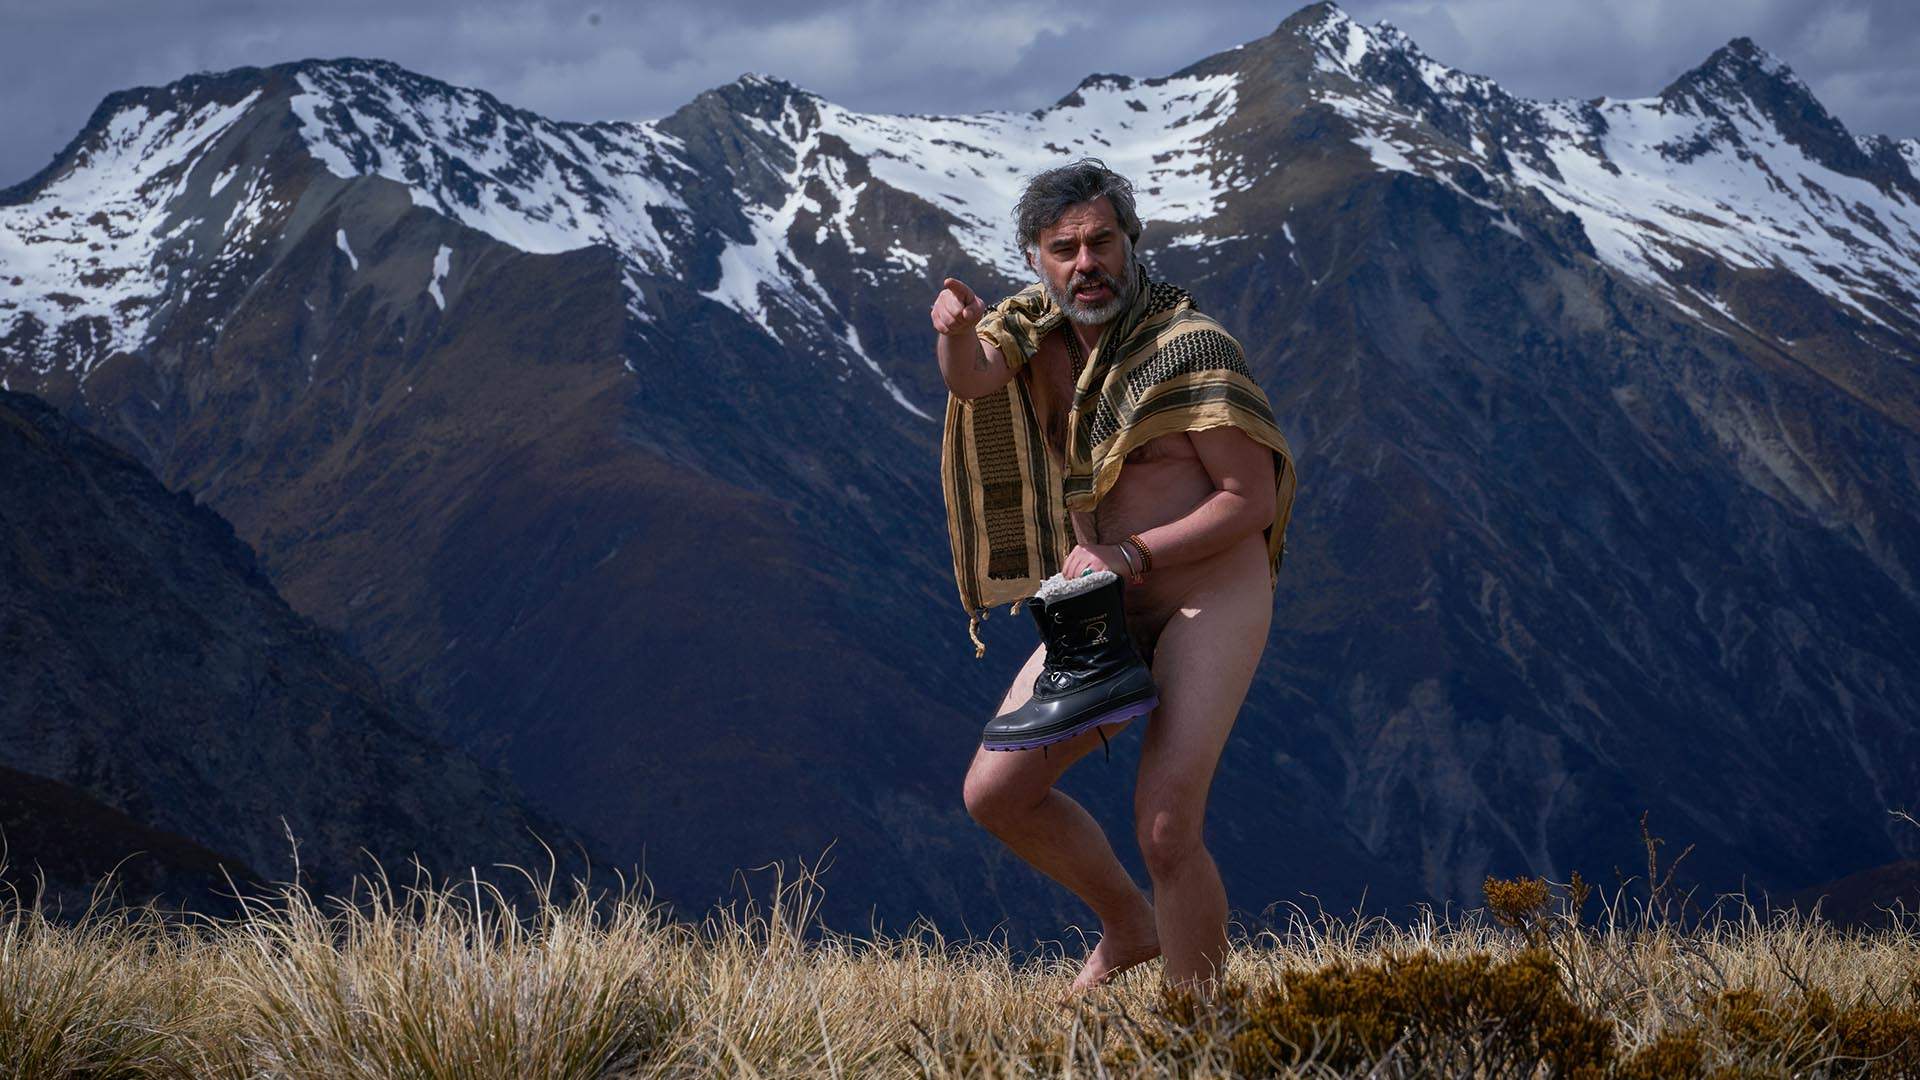 The Trailer for Wild NZ Comedy 'Nude Tuesday' Pairs Naked Hiking with All-Gibberish Dialogue